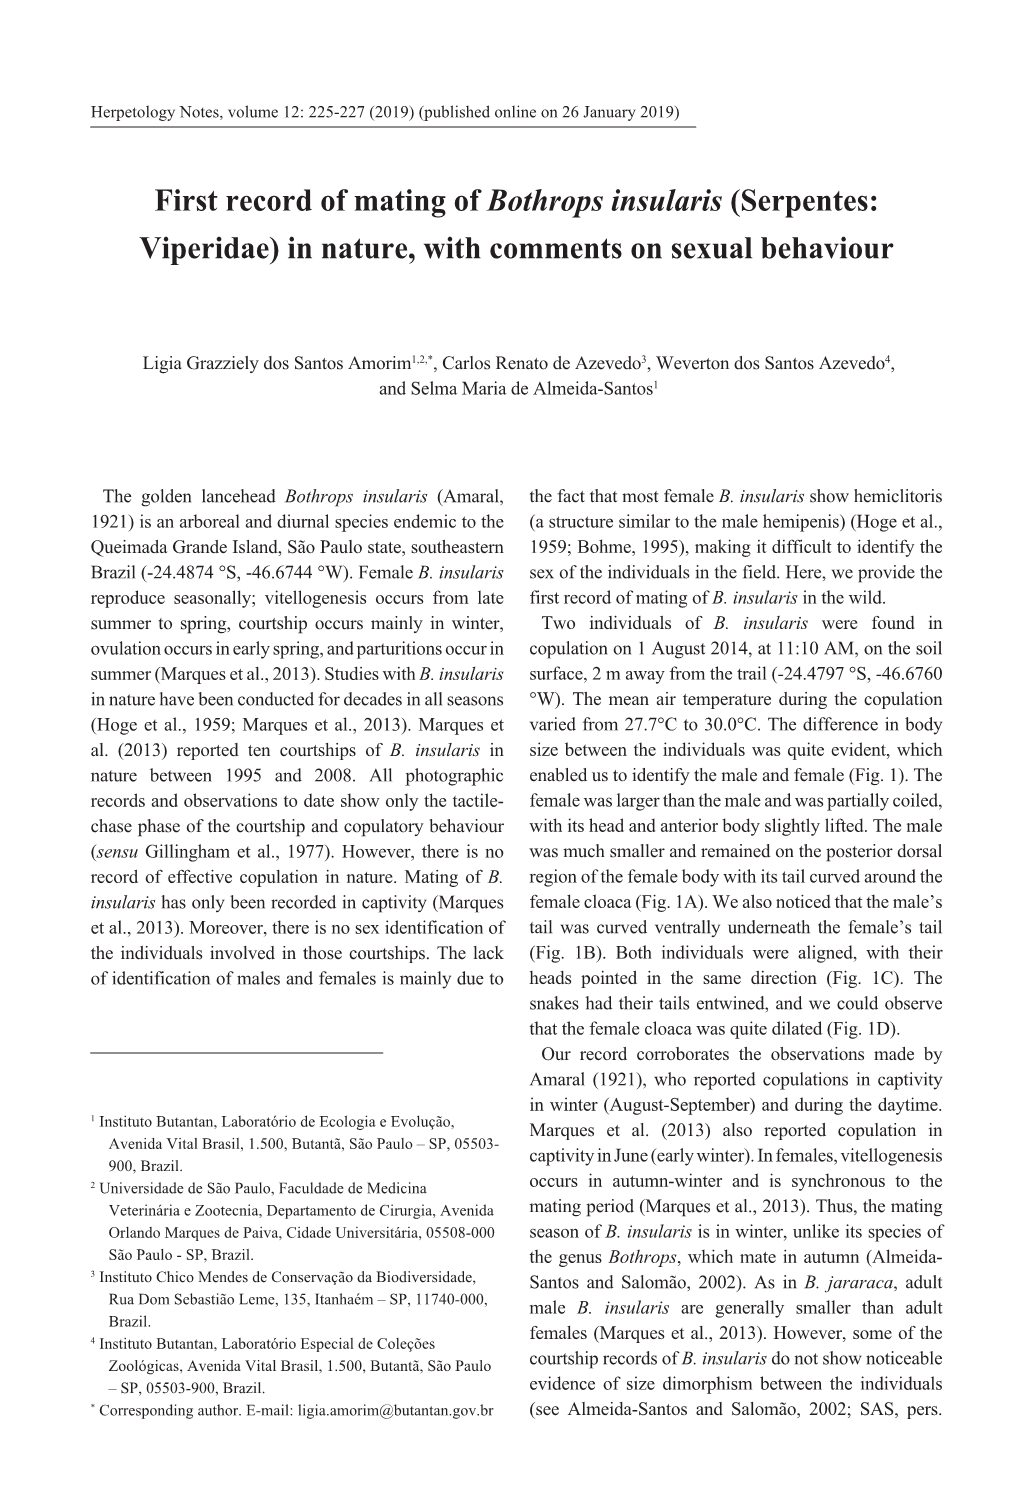 First Record of Mating of Bothrops Insularis (Serpentes: Viperidae) in Nature, with Comments on Sexual Behaviour